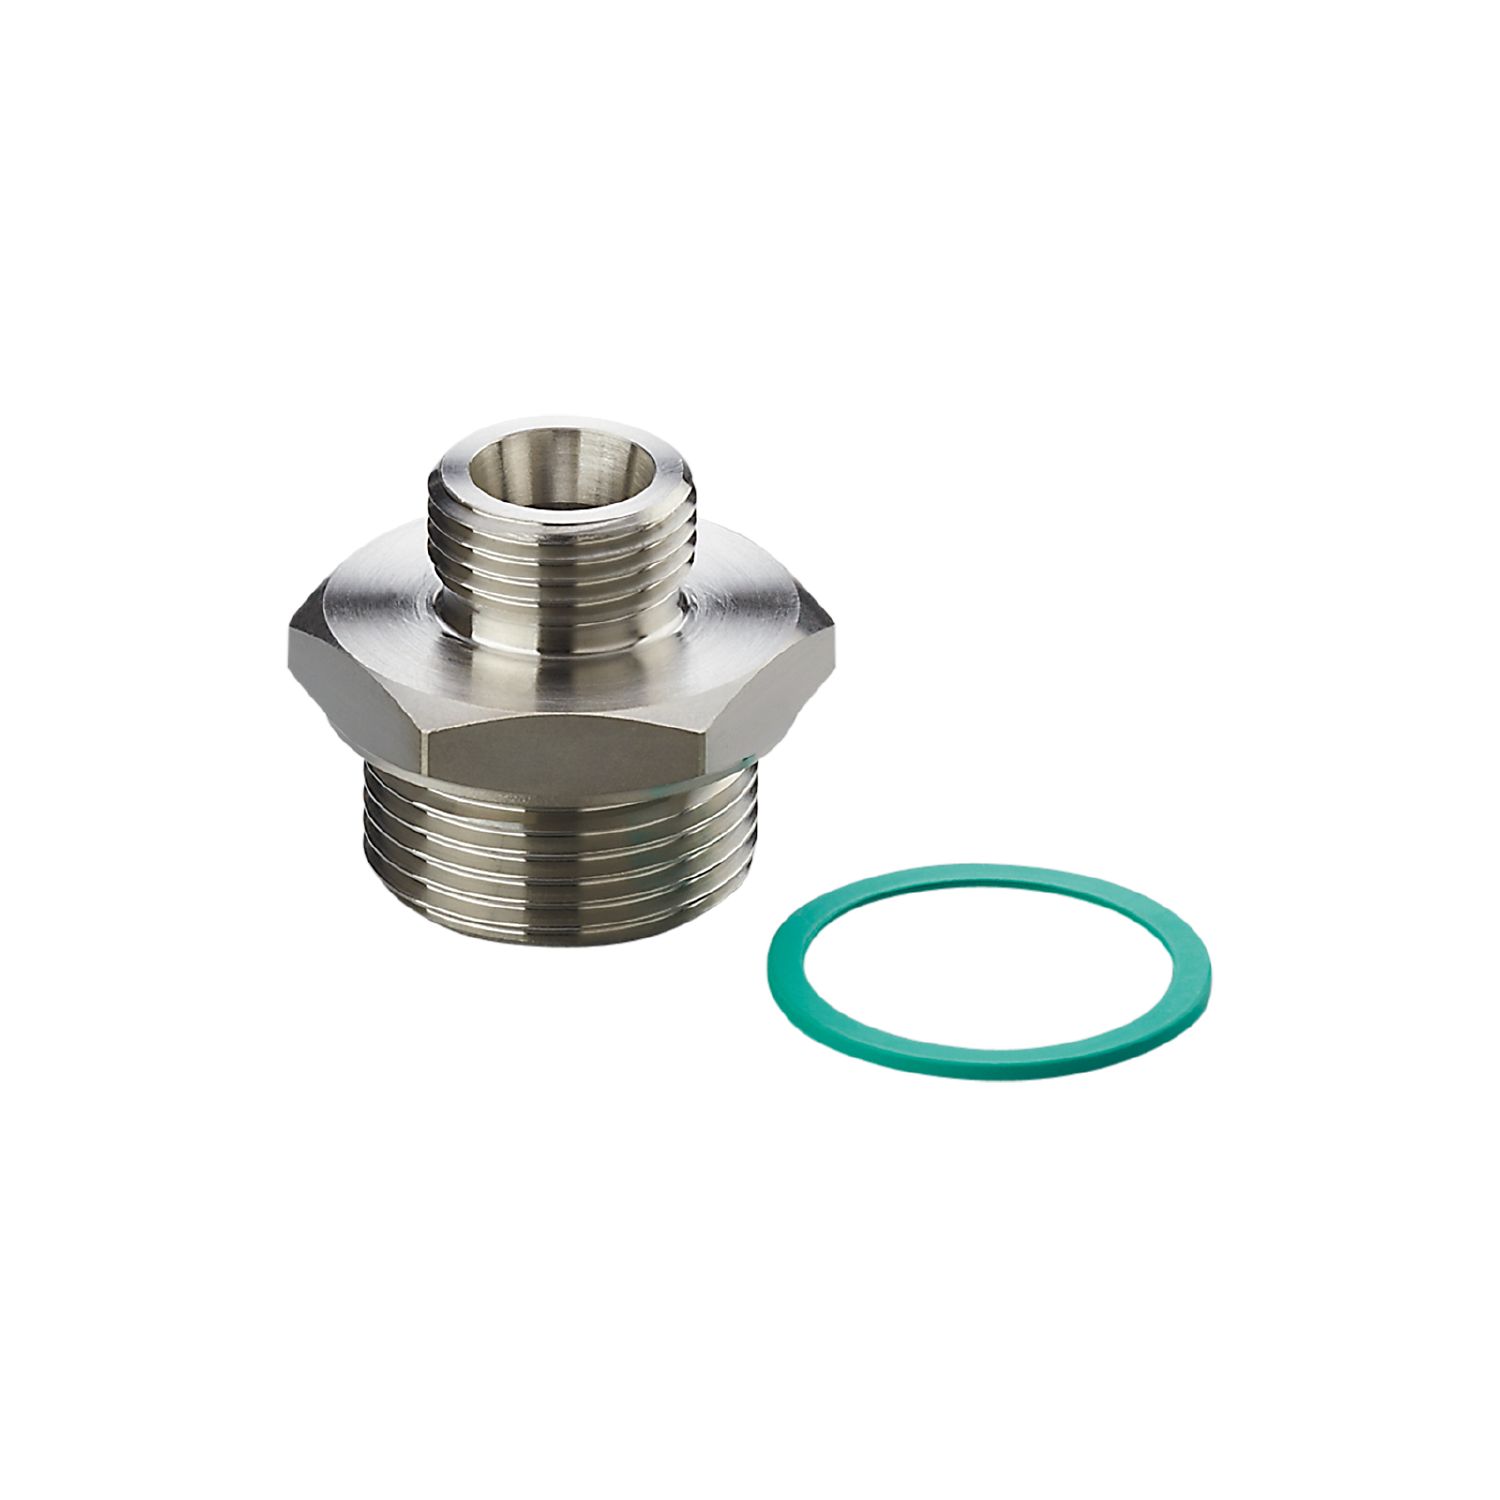 E40238 - Screw-in adapter for process sensors - ifm